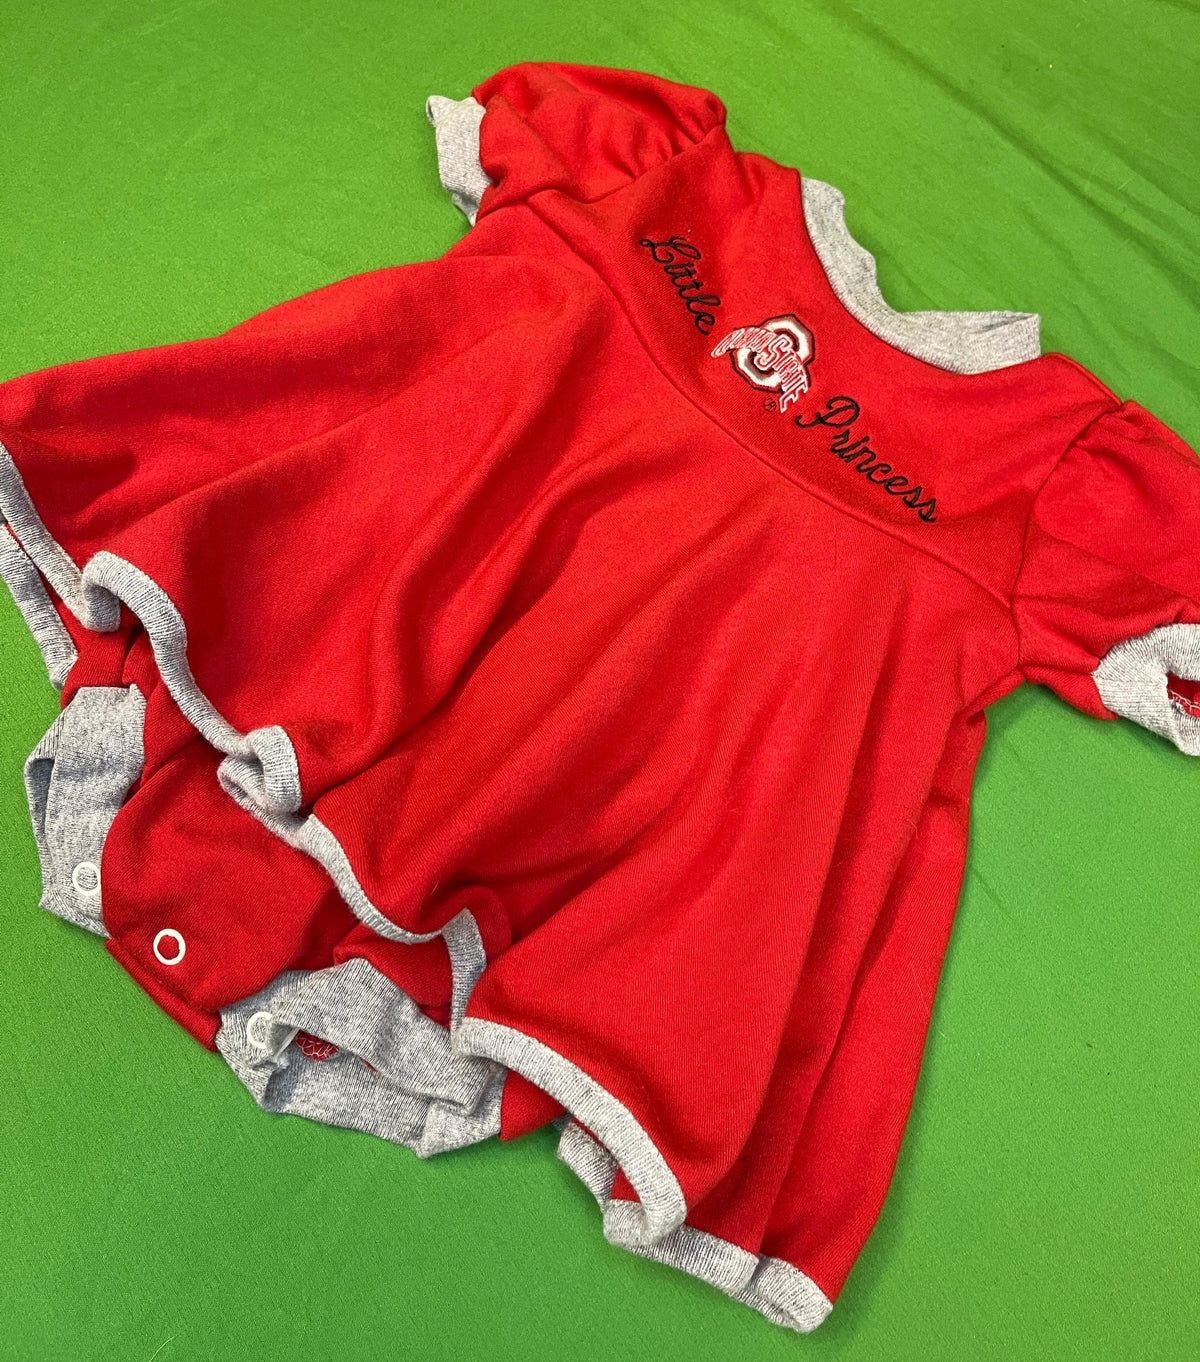 NCAA Ohio State Buckeyes Baby Girl Outfit Dress 12 months